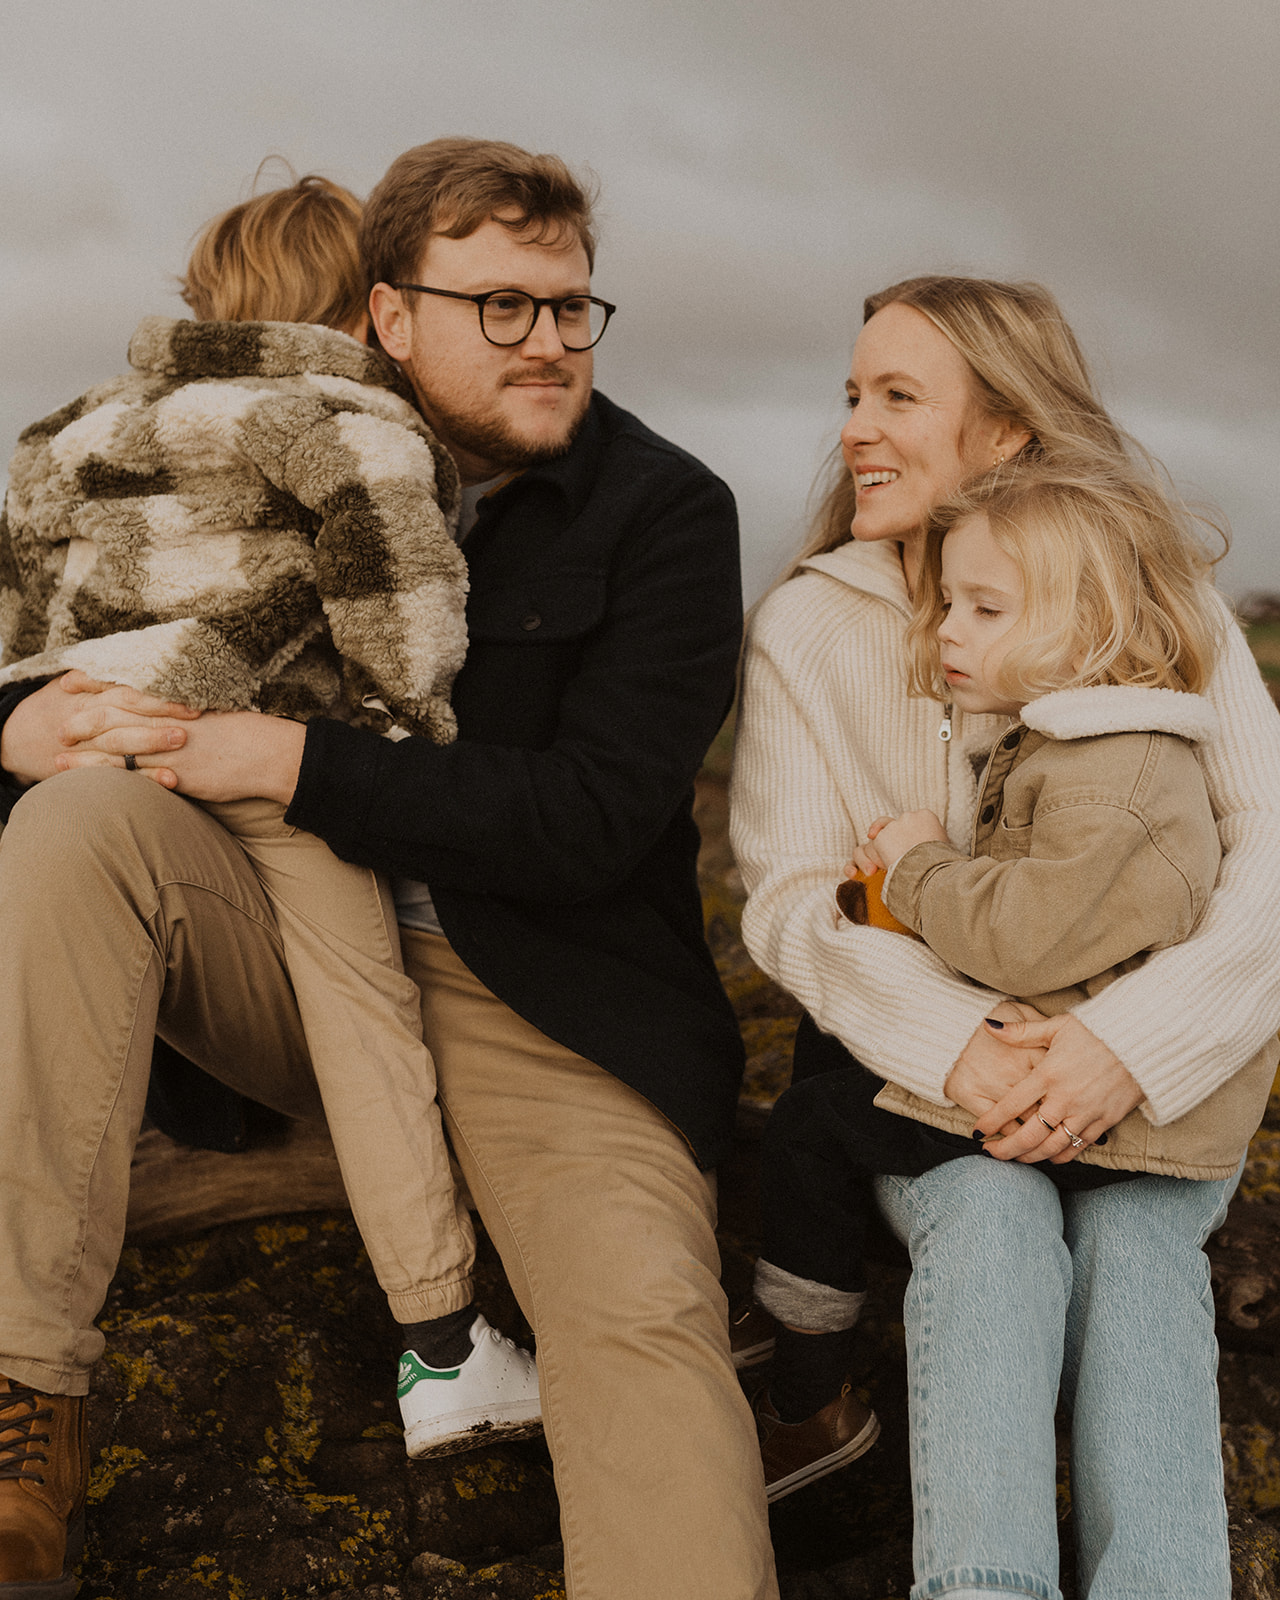 I loved meeting and photographing this sweet family on a sunny December weekend at Elie Beach in Fife! Fife Family Photo